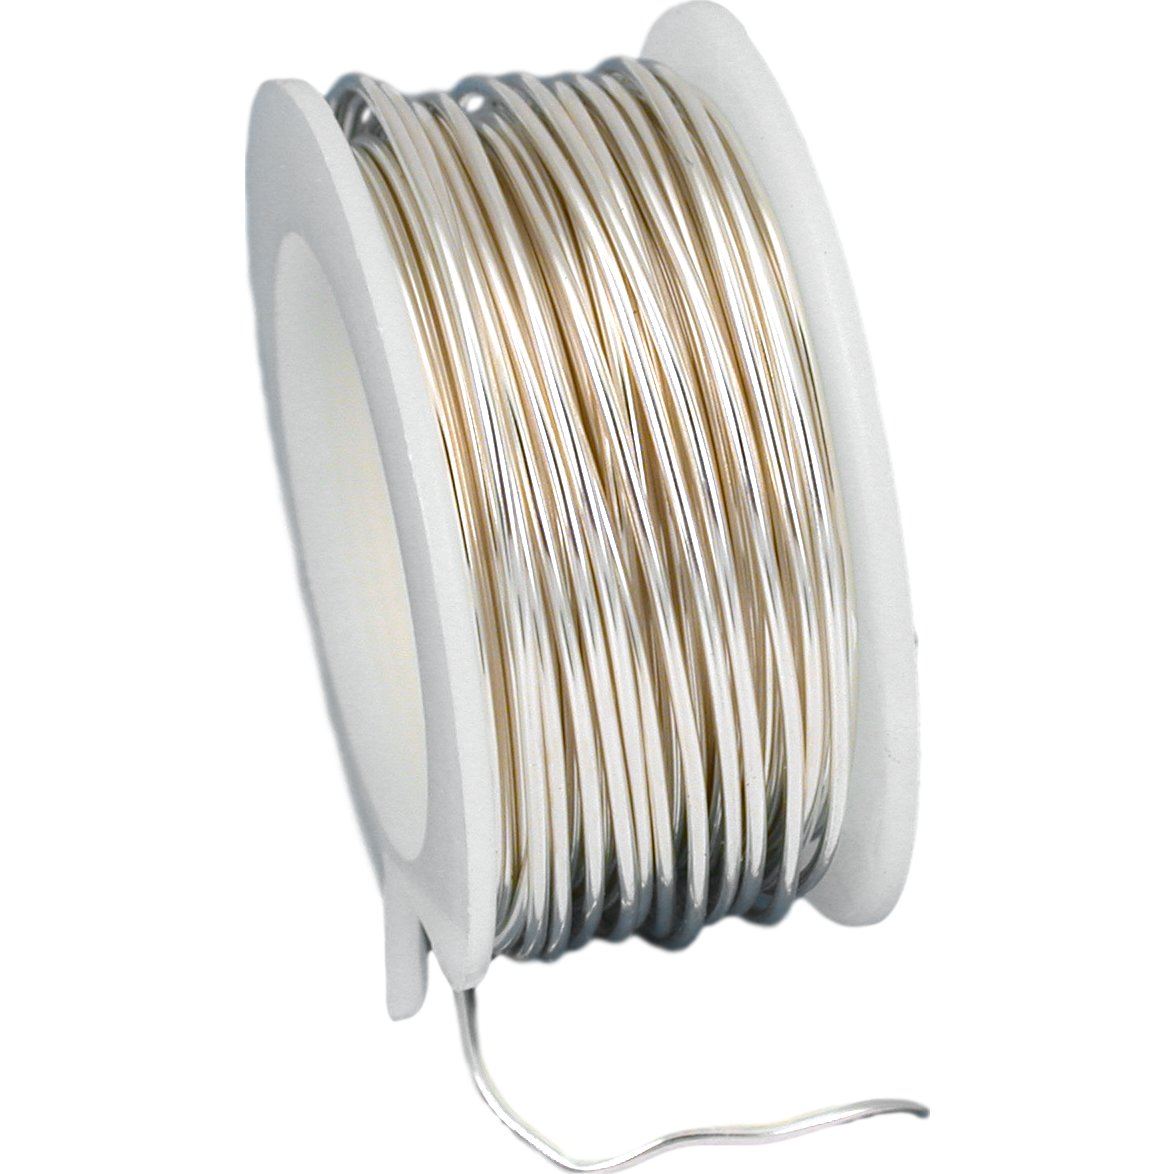 Artistic Wire Spool Silver Plated 20 Gauge 5.4M